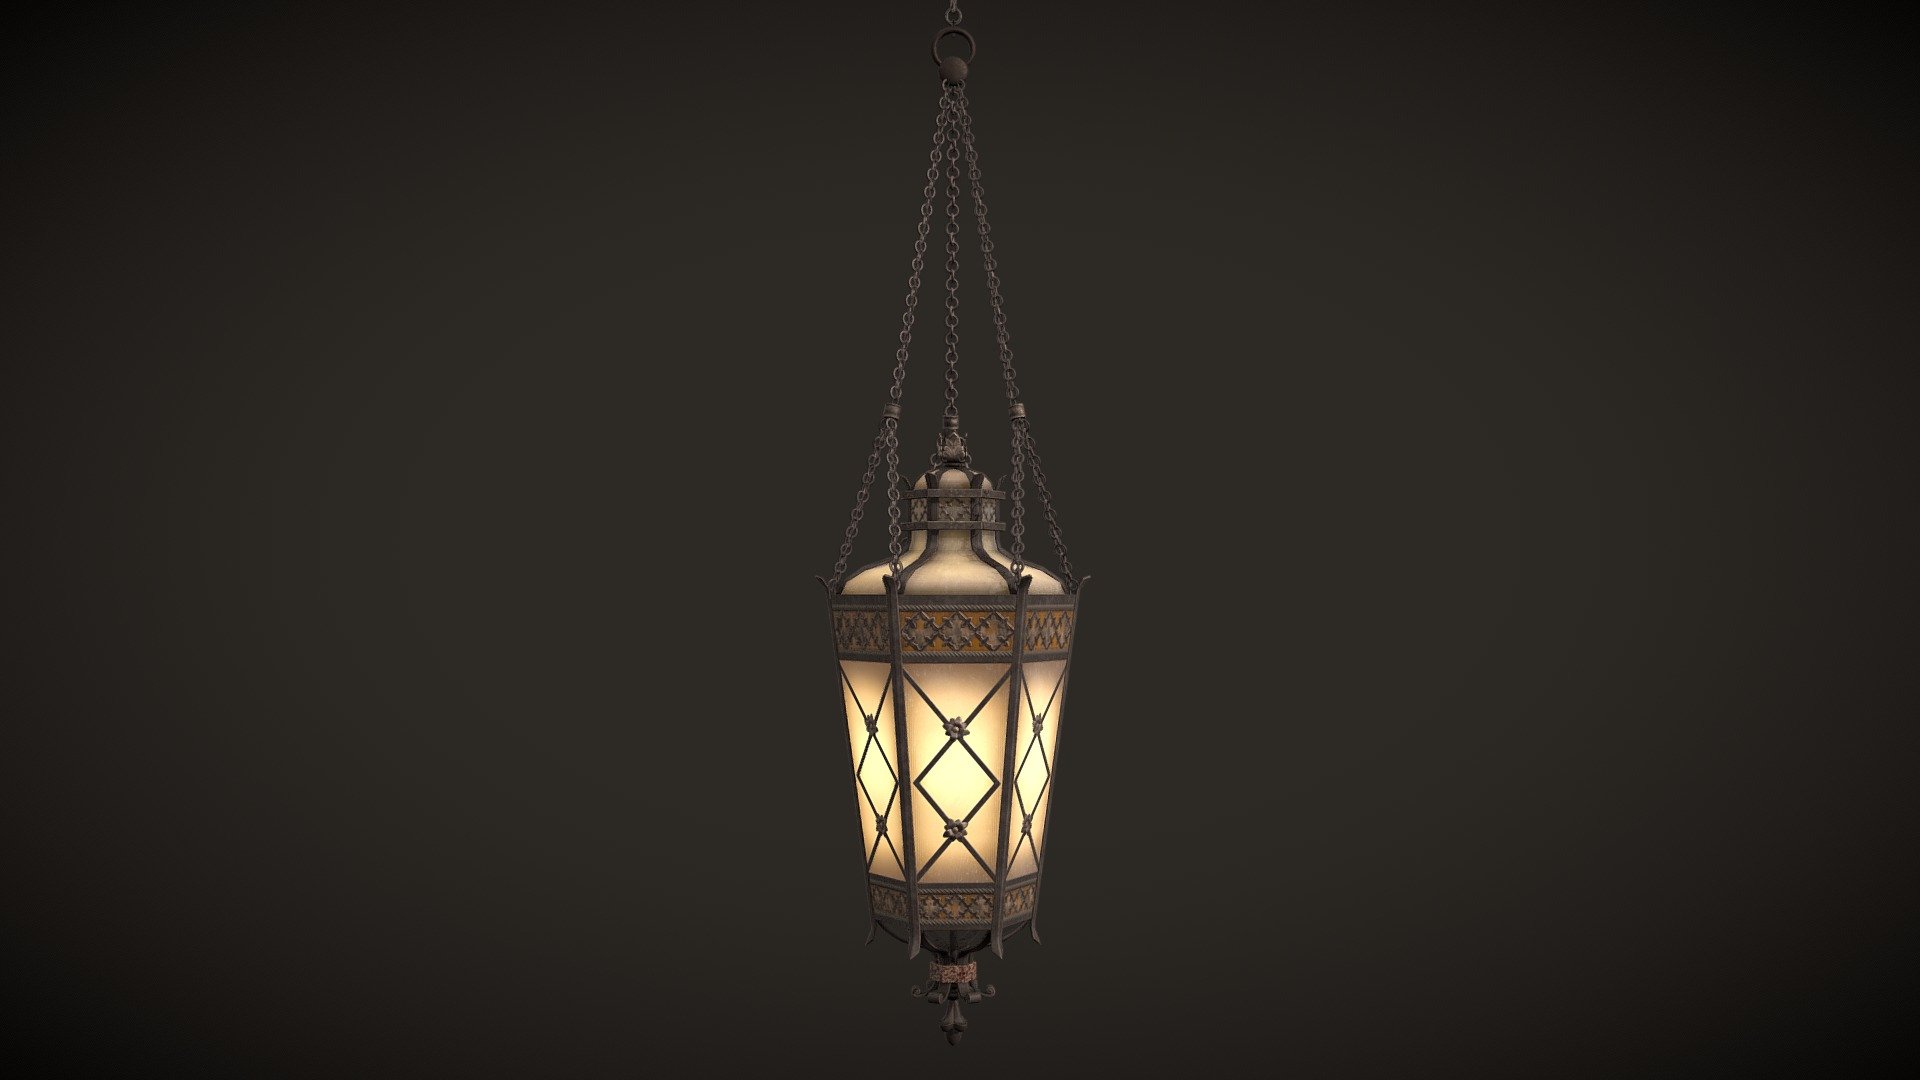 It's a lowpoly game ready 3D model of lantern with unwrapped UVs and PBR textures.

Includes the following 3d file types: Fbx.

UVs:


channel 1: overlapping
channel 2: non-overlapping (for baking lightmaps)

Textures set includes:


PBR Metal Roughness: BaseColor, Roughness, Metallic, Normal DirectX, Normal OpenGL, AO, Opacity(BaseColor Alpha), Emissive.
Unity: AlbedoTransparency, MetallicSmoothness, Normal, AO, Emission.
Unreal Engine: BaseColor, OcclusionRoughnessMetallic, Normal, Opacity(BaseColor Alpha), Emissive.
Textures resolution: 2048x2048px. Textures format: Targa.

Polygon Count: 3,514. Verts: 2,155

Real world scaled. Units: cm 3d model